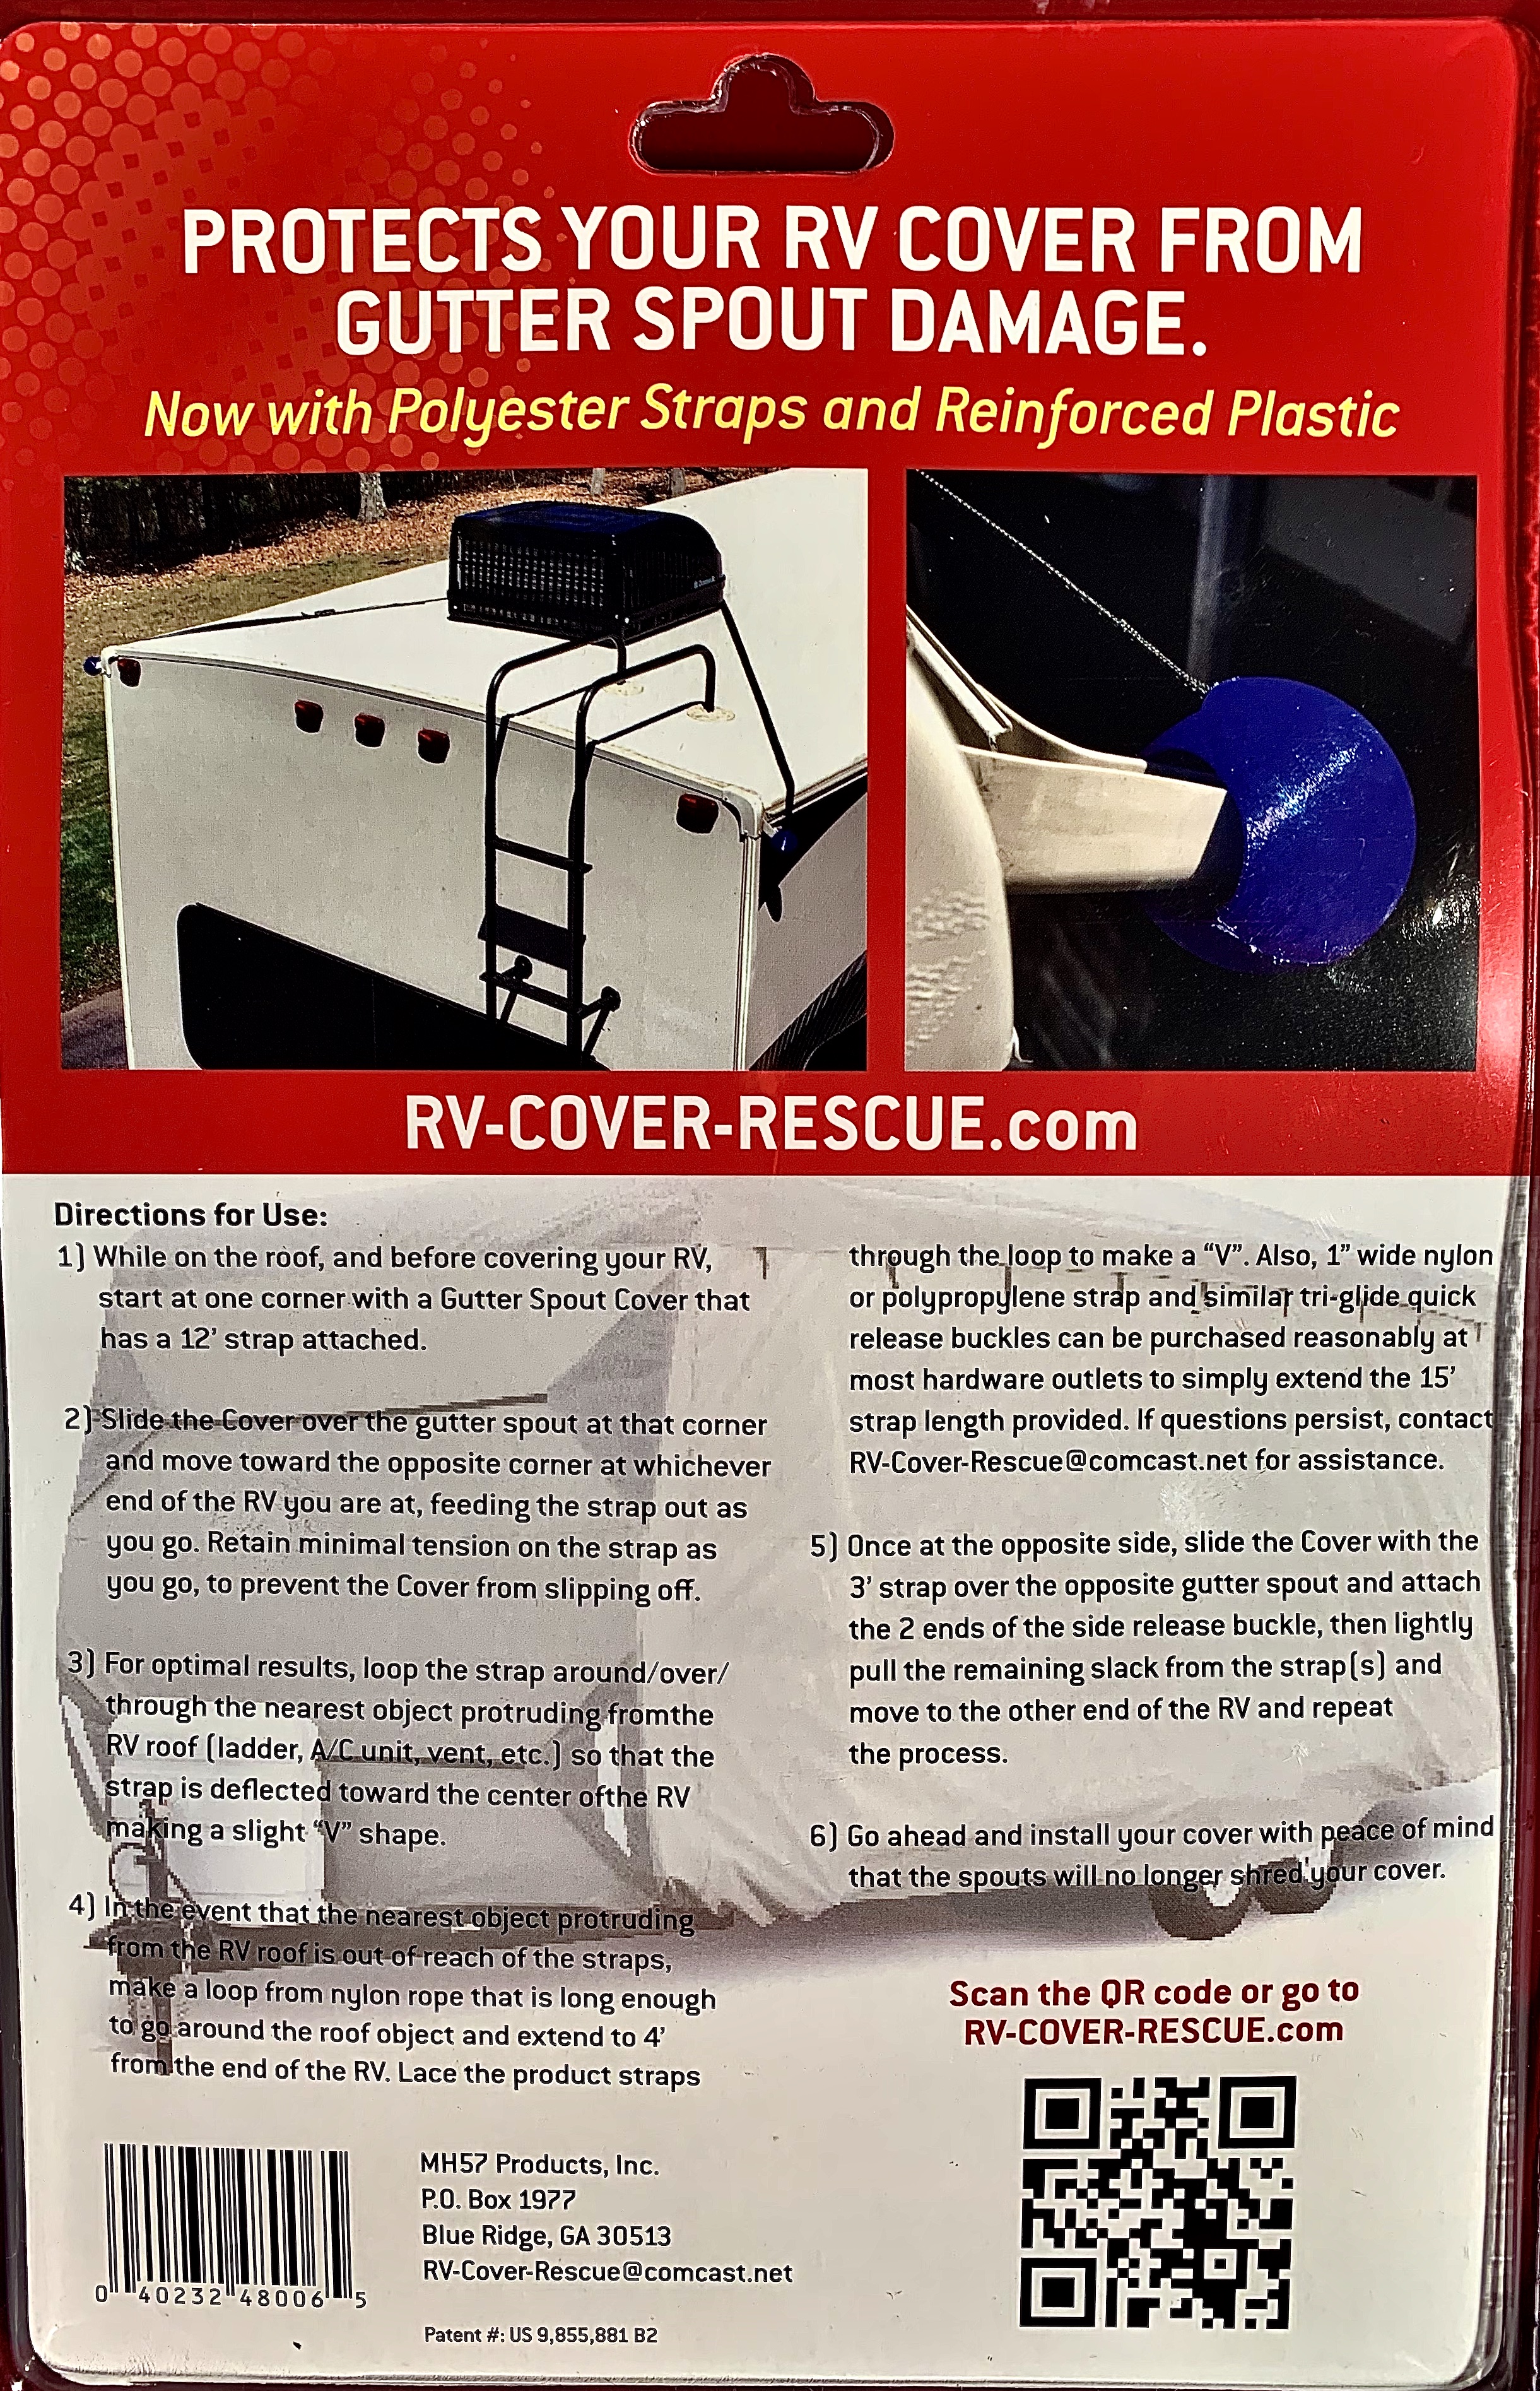 Details about   RV Cover Rescue Gutter Spout Covering System MH57 Products 